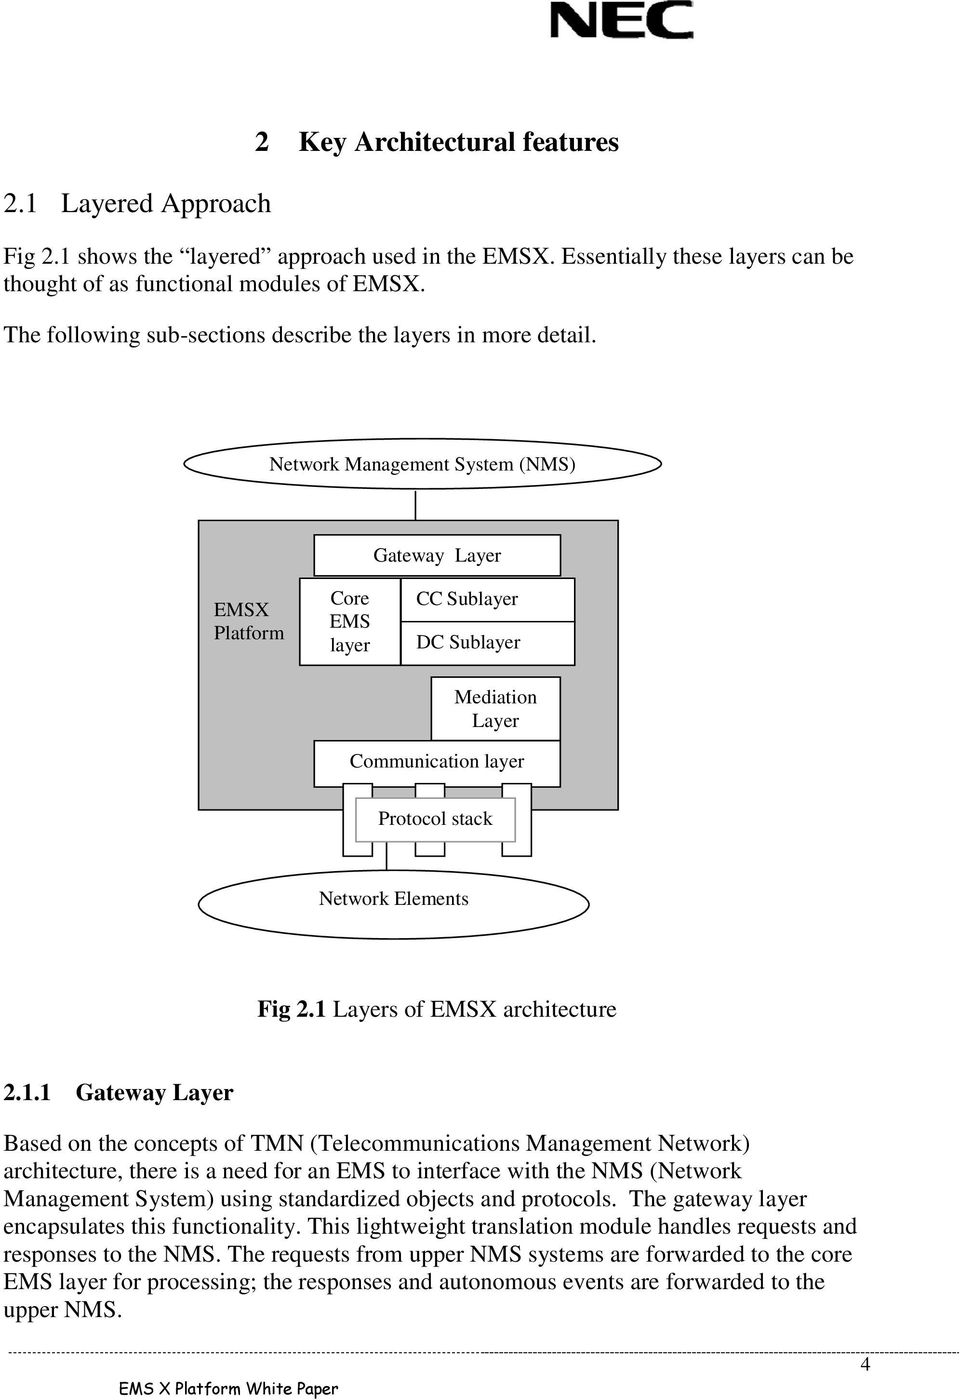 1 s of EMSX architecture 2.1.1 Gateway Based on the concepts of TMN (Telecommunications Management Network) architecture, there is a need for an EMS to interface with the NMS (Network Management